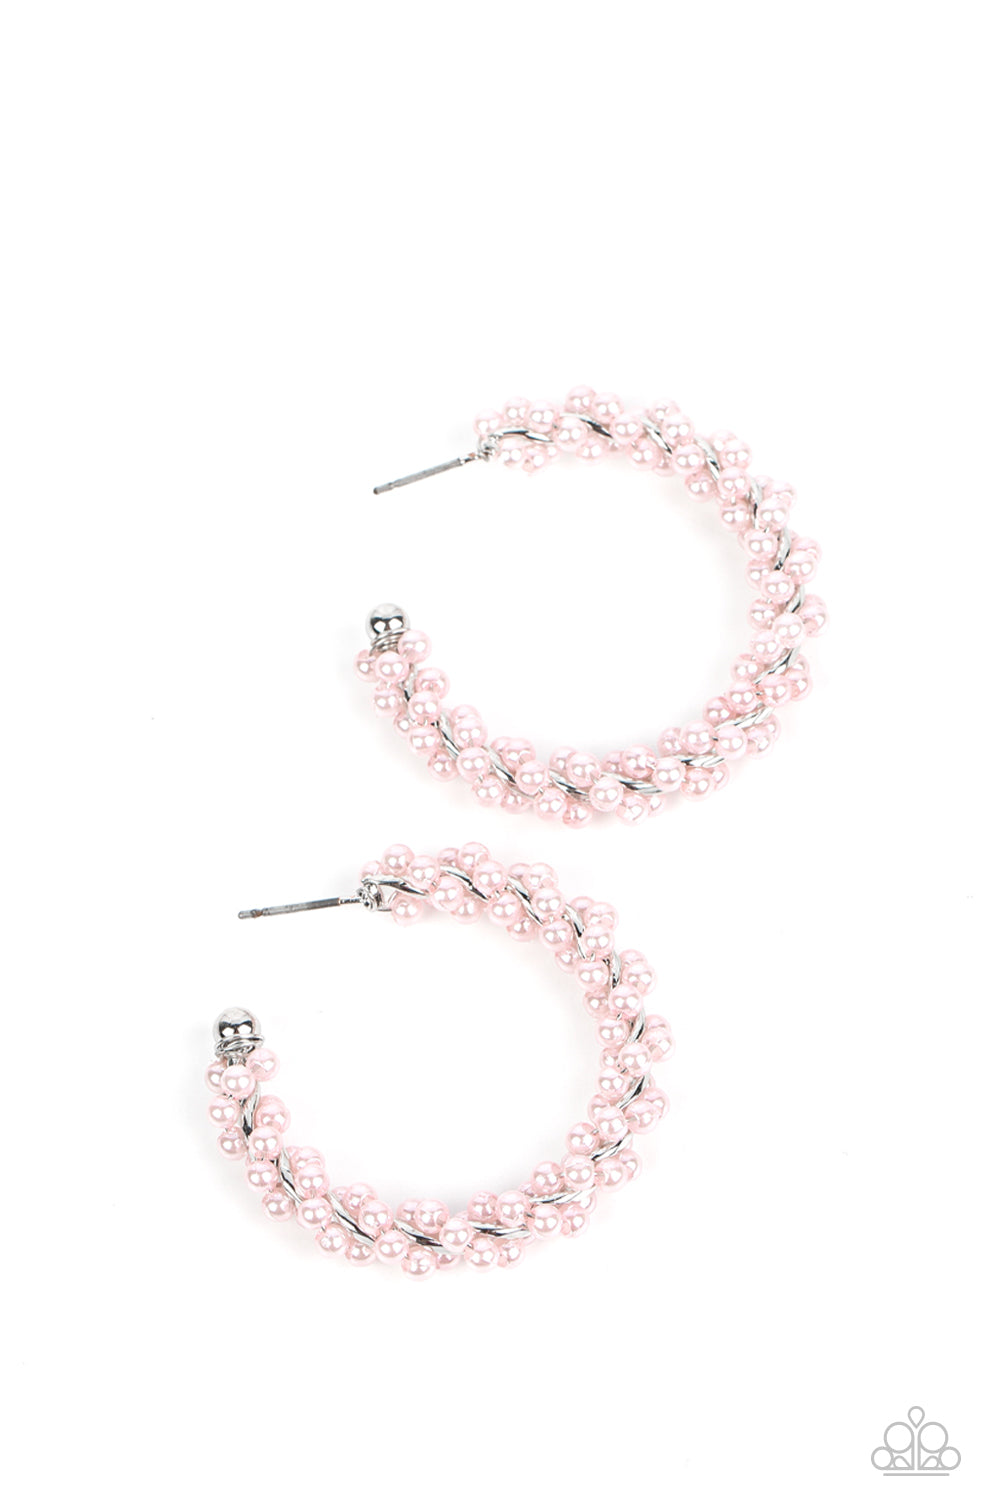 Yacht Royale Pink Pearl Hoop Earring - Paparazzi Accessories  A dainty strand of baby pink pearls is delicately wrapped around a classic silver hoop, creating bubbly refinement. Earring attaches to a standard post fitting. Hoop measures approximately 1 1/2" in diameter.  Sold as one pair of hoop earrings.  P5HO-PKXX-045XX